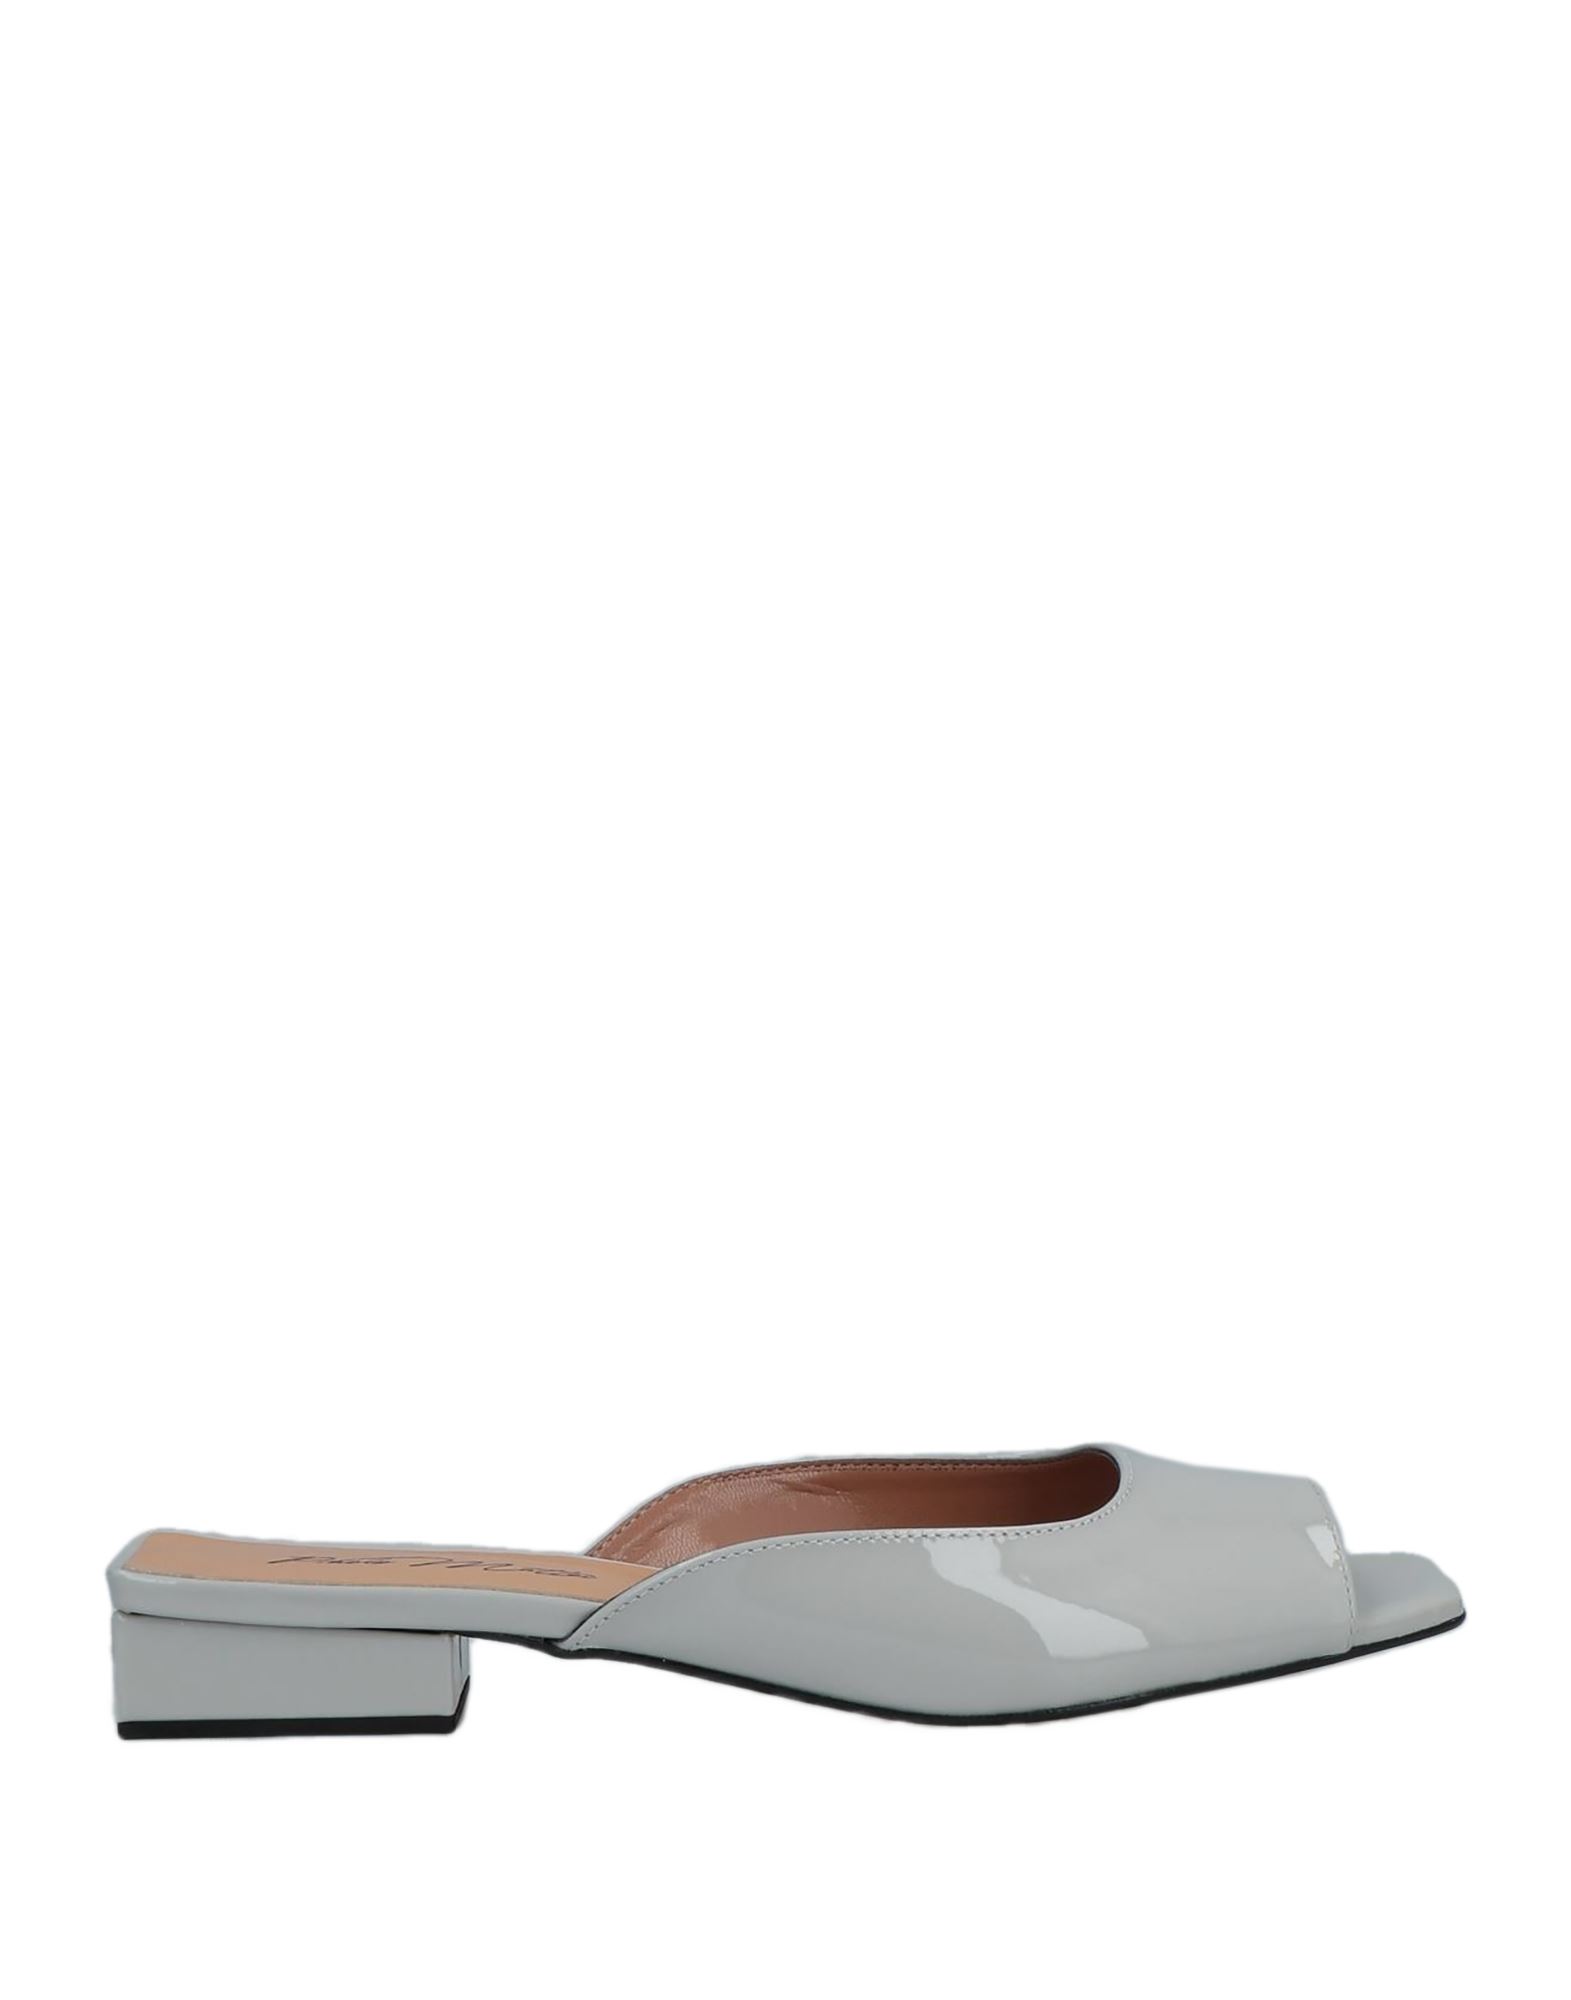 Paolo Mattei Sandals In Light Grey